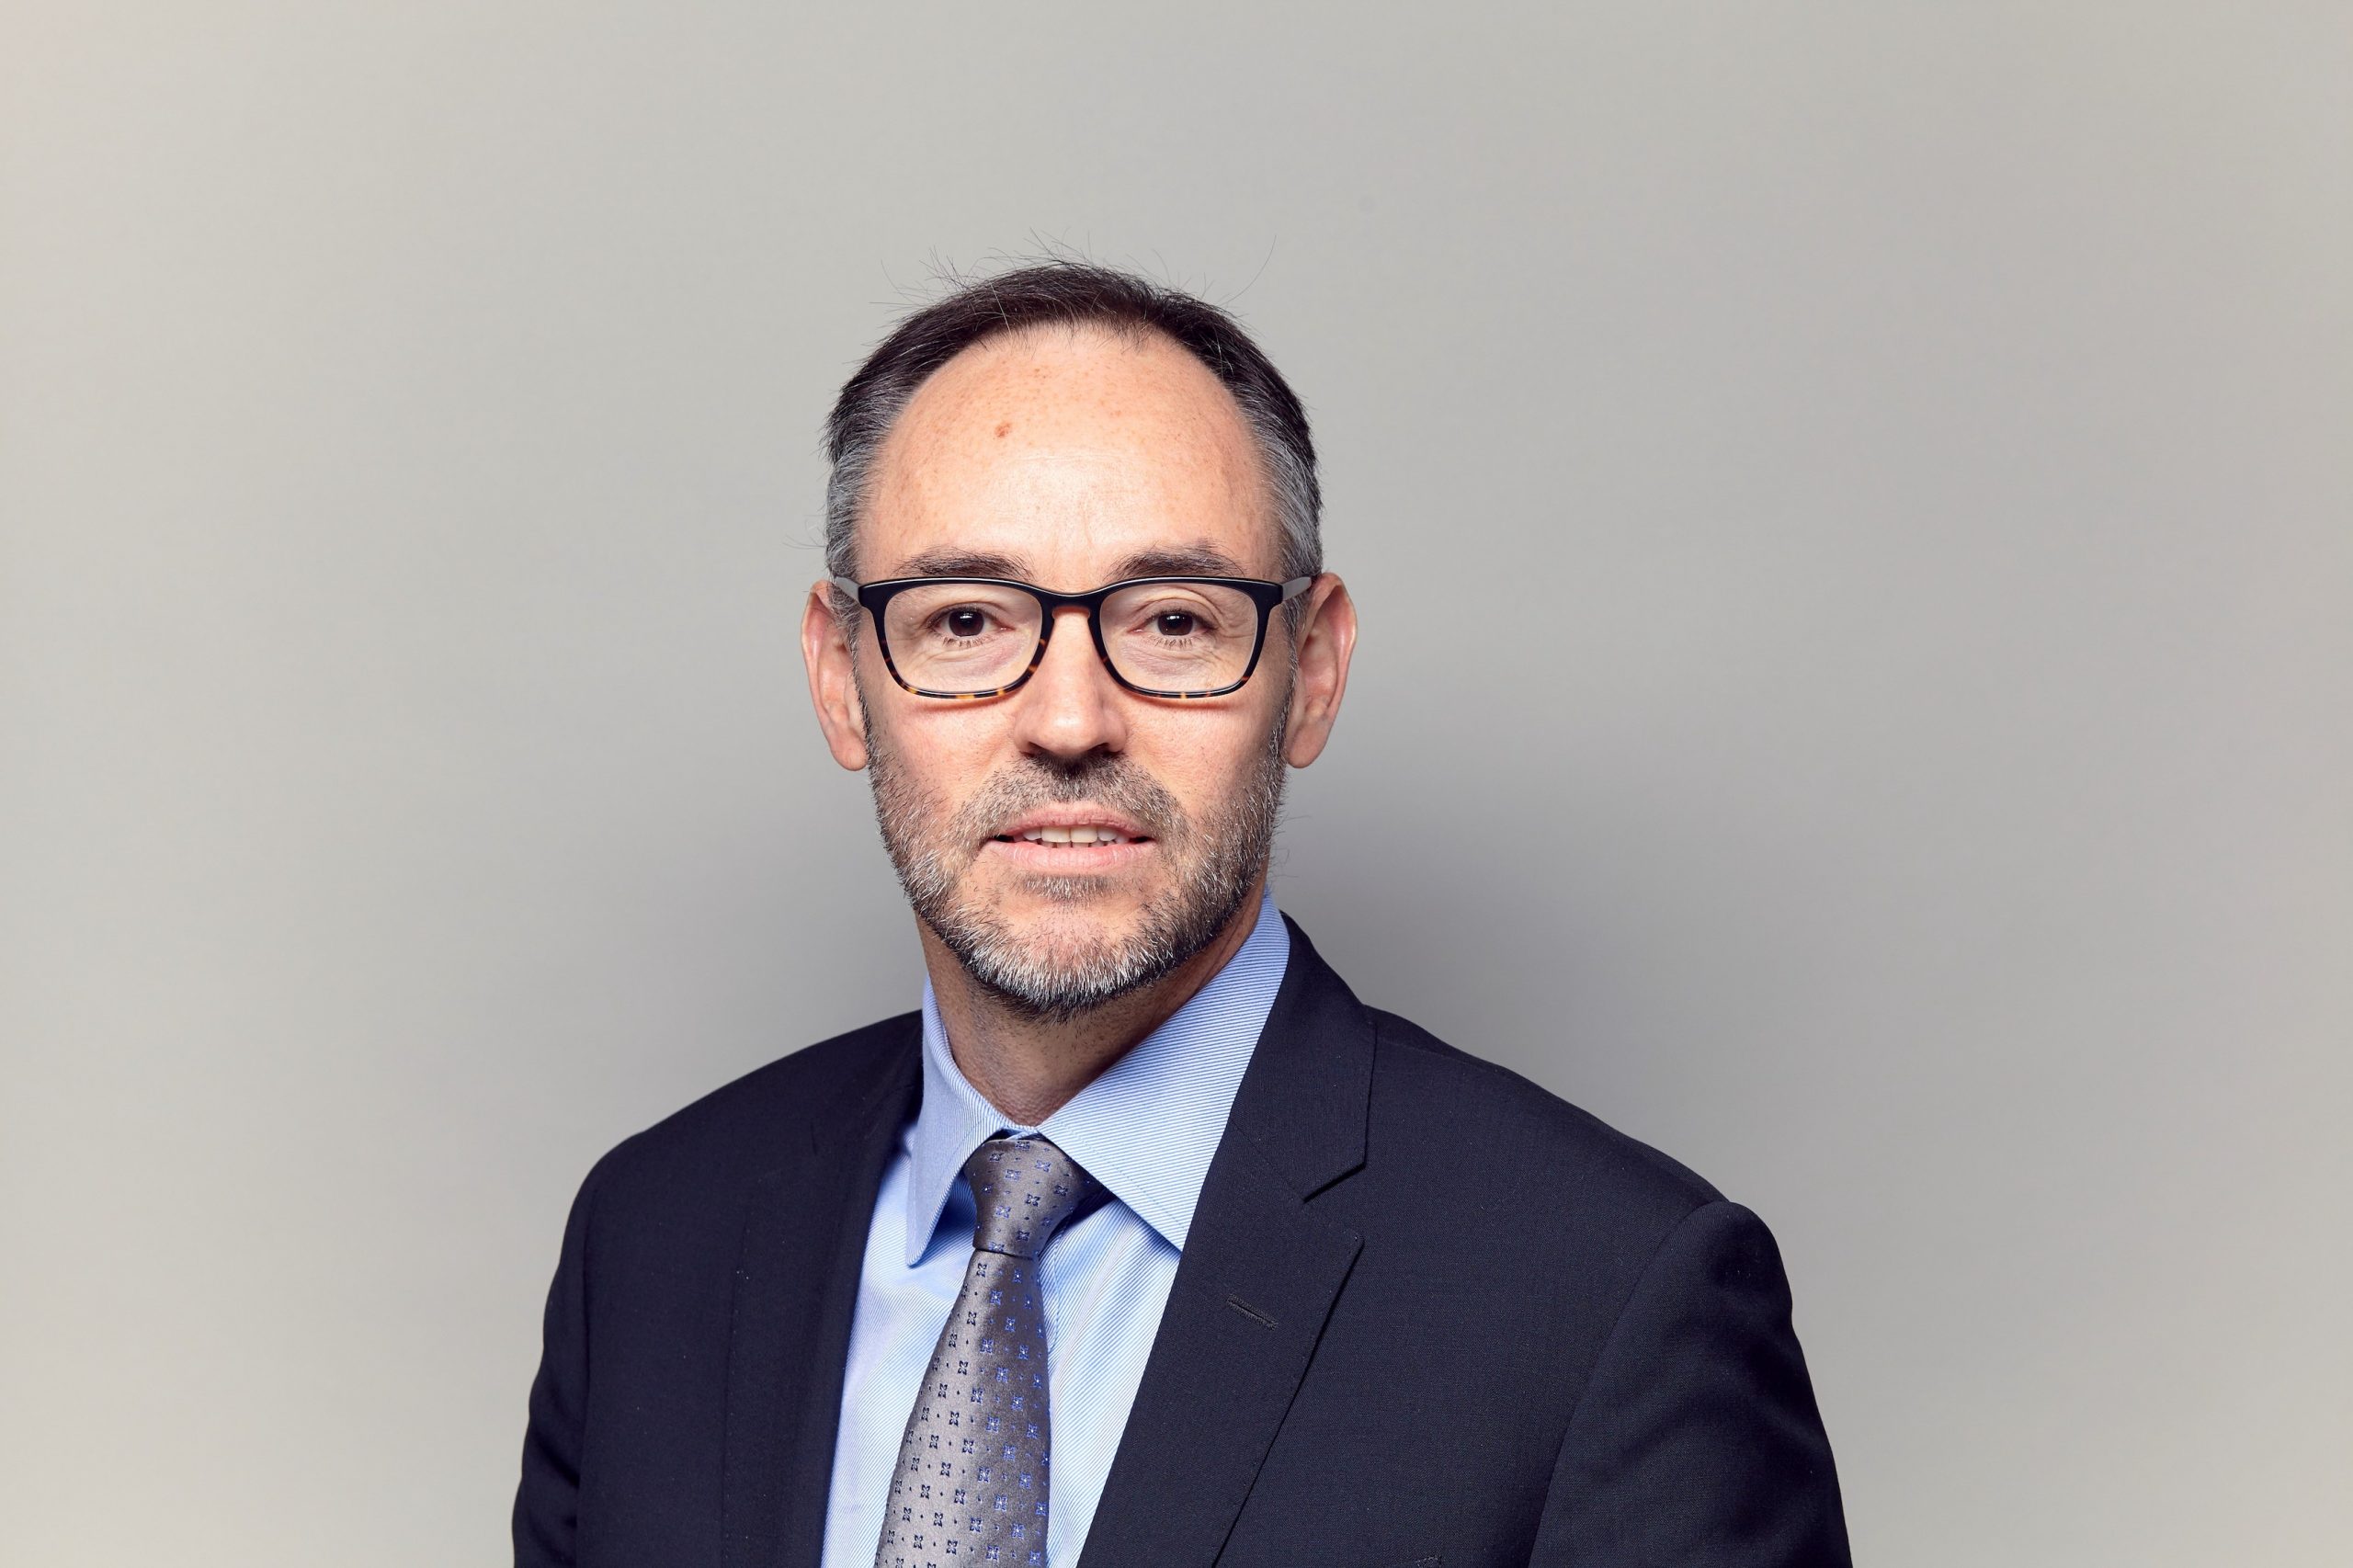 Neuer Global Investment Strategist bei PGIM Fixed Income in London